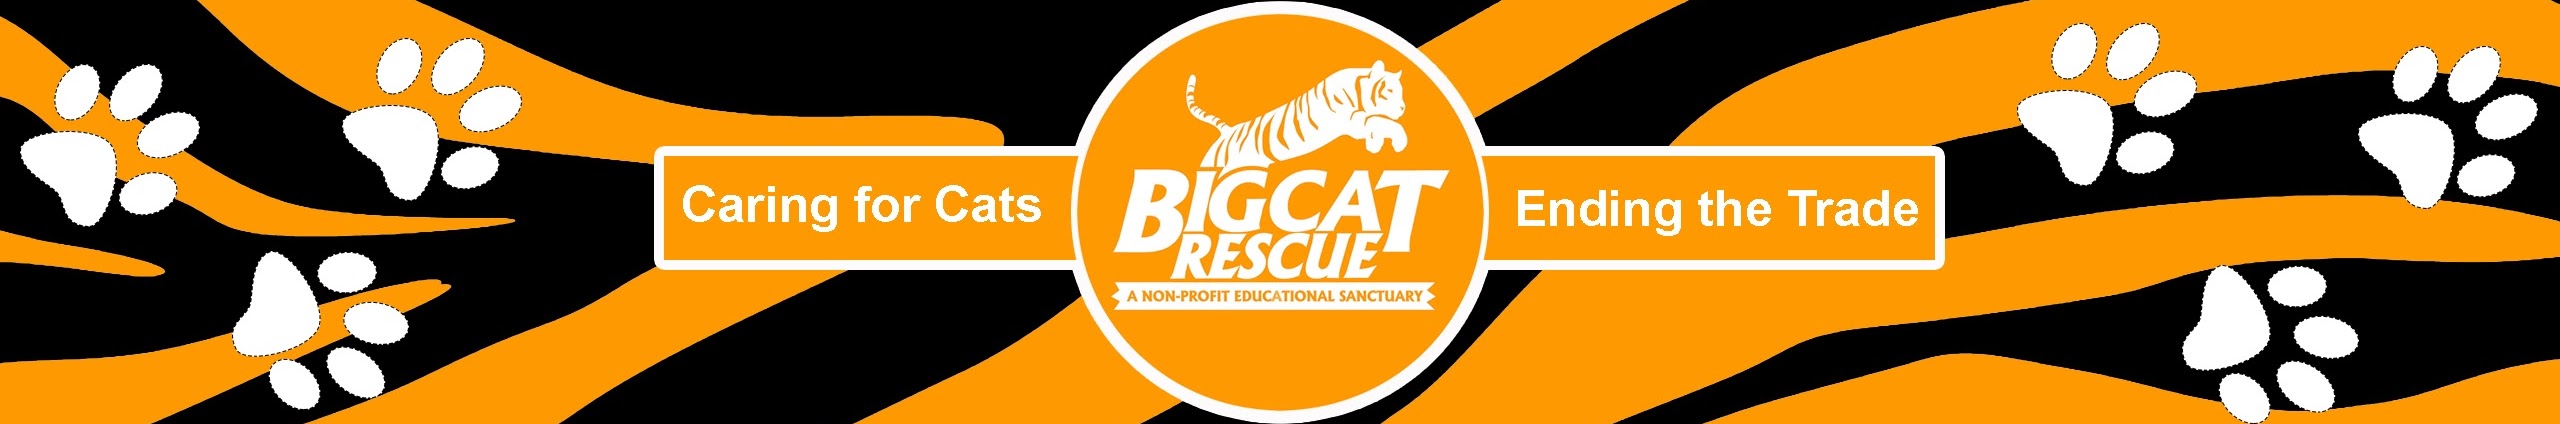 Big Cat Rescue - On Tuby